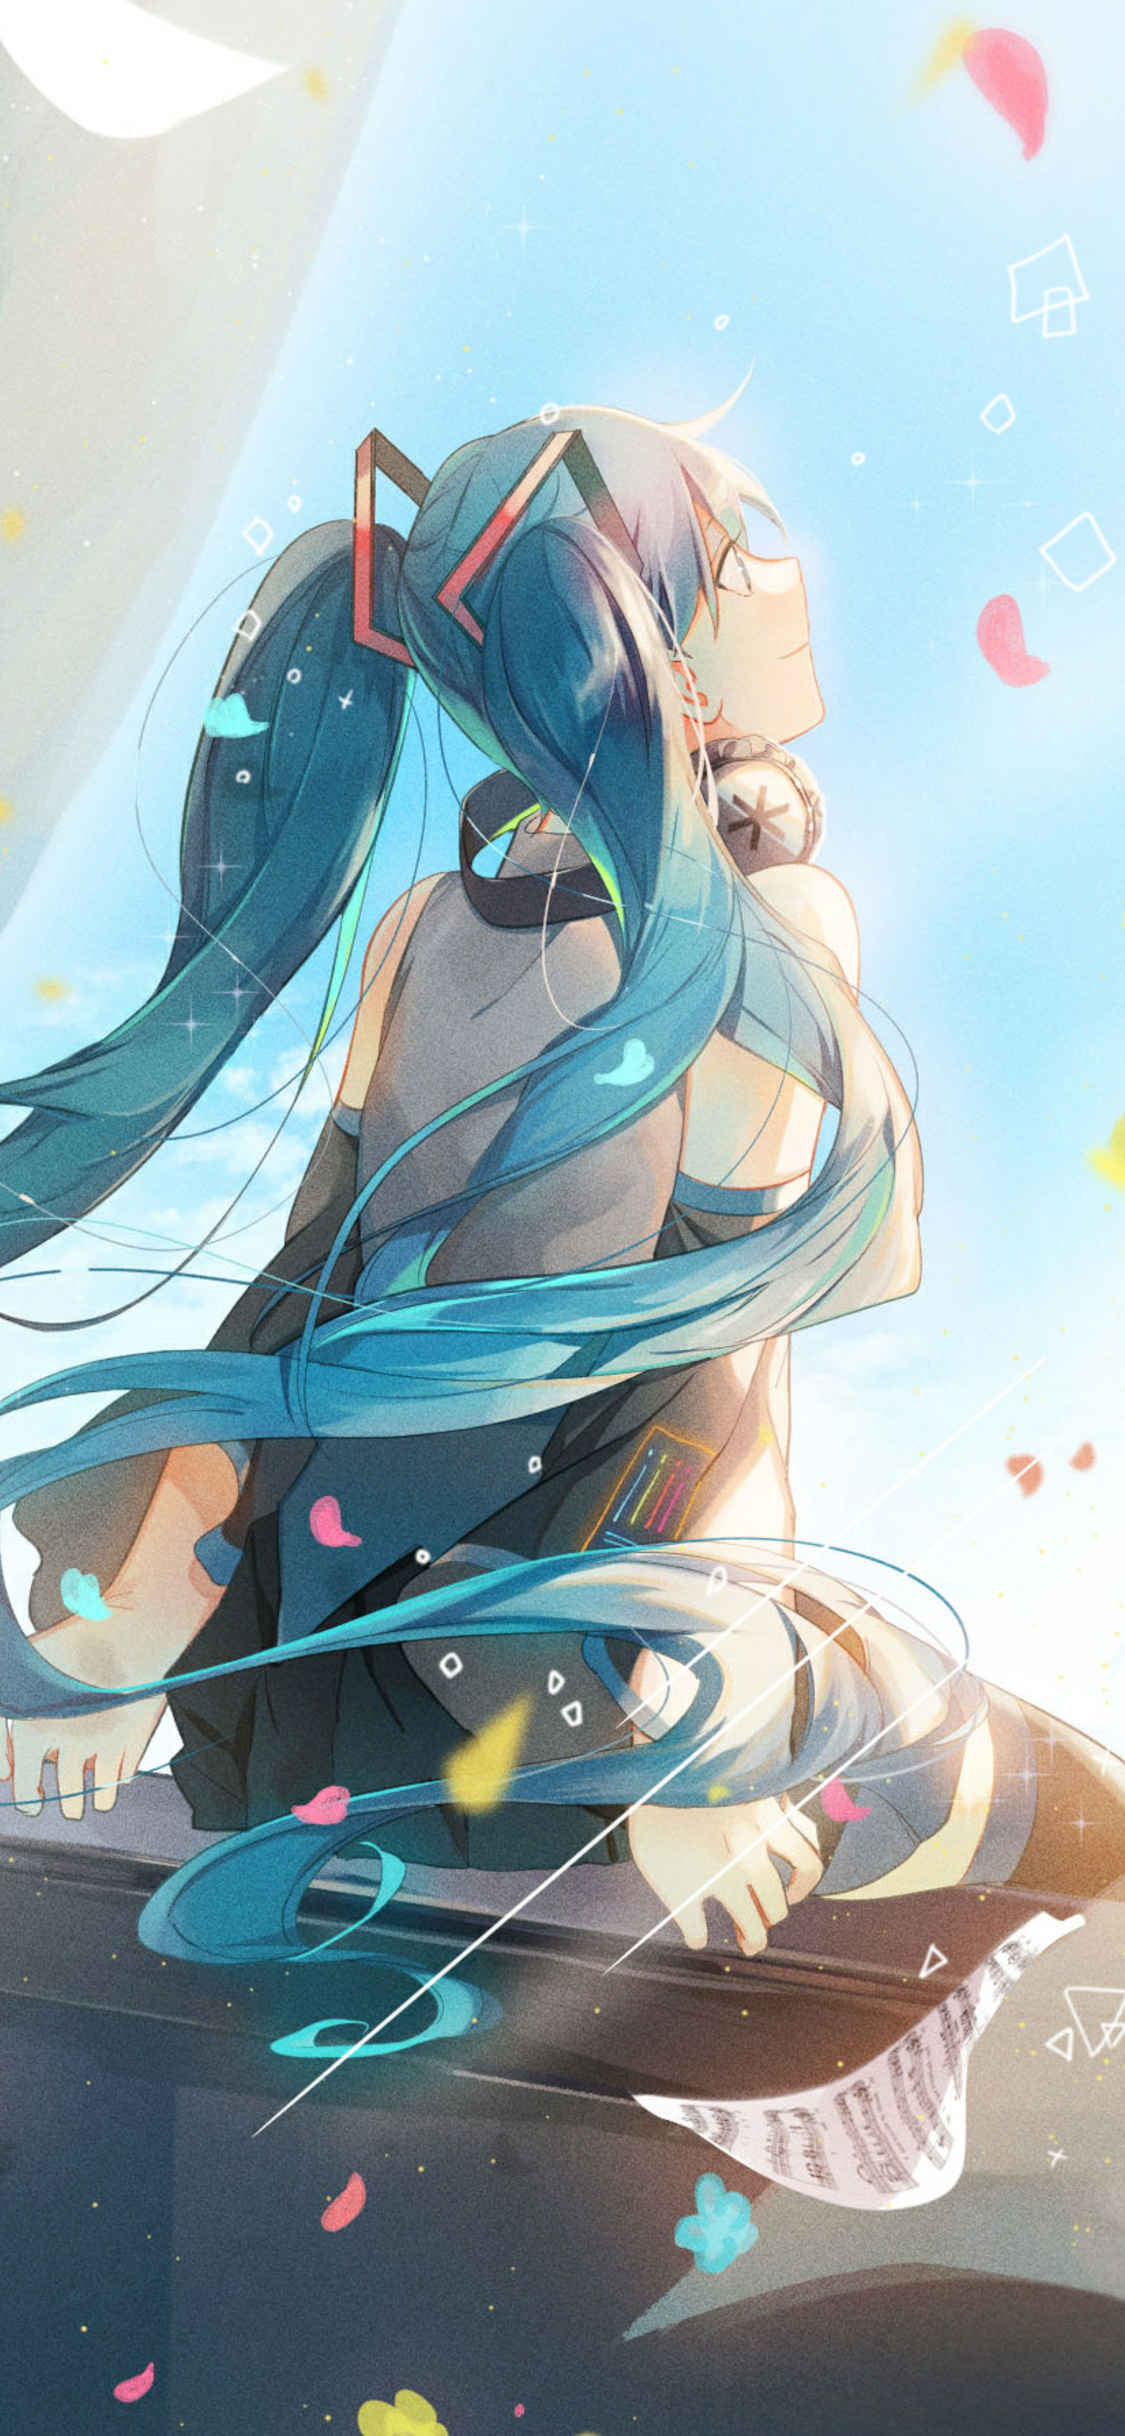 1125x2436 Hatsune Miku Vocaloid Anime 4k Iphone Xs Iphone 10 Iphone X Hd 4k Wallpapers Images Backgrounds Photos And Pictures